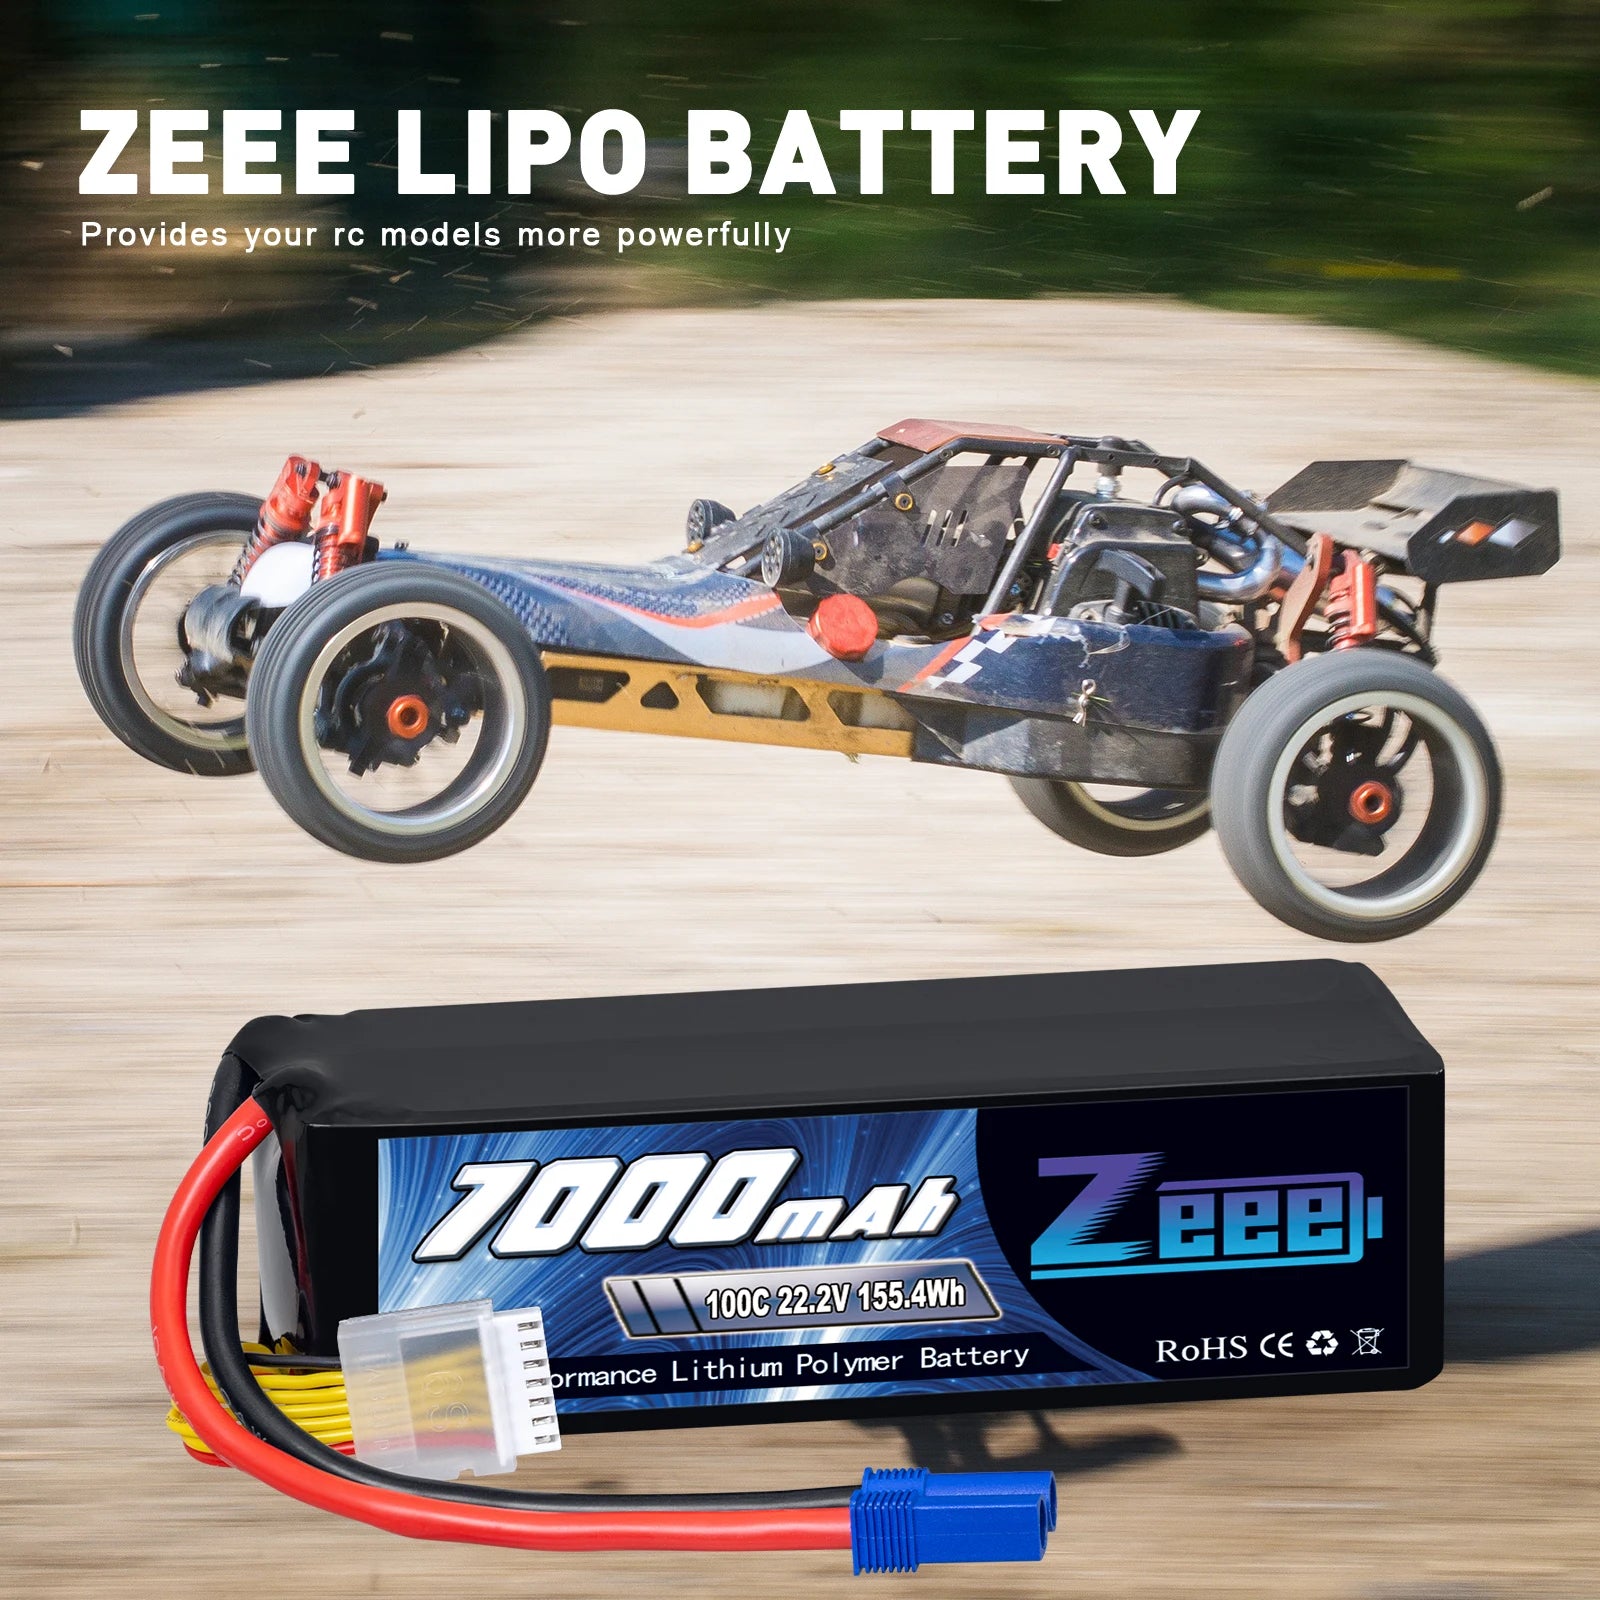 2Units Zeee Lipo Battery, ZEEE Lipo BATTERY Provides your rc models more powerfully